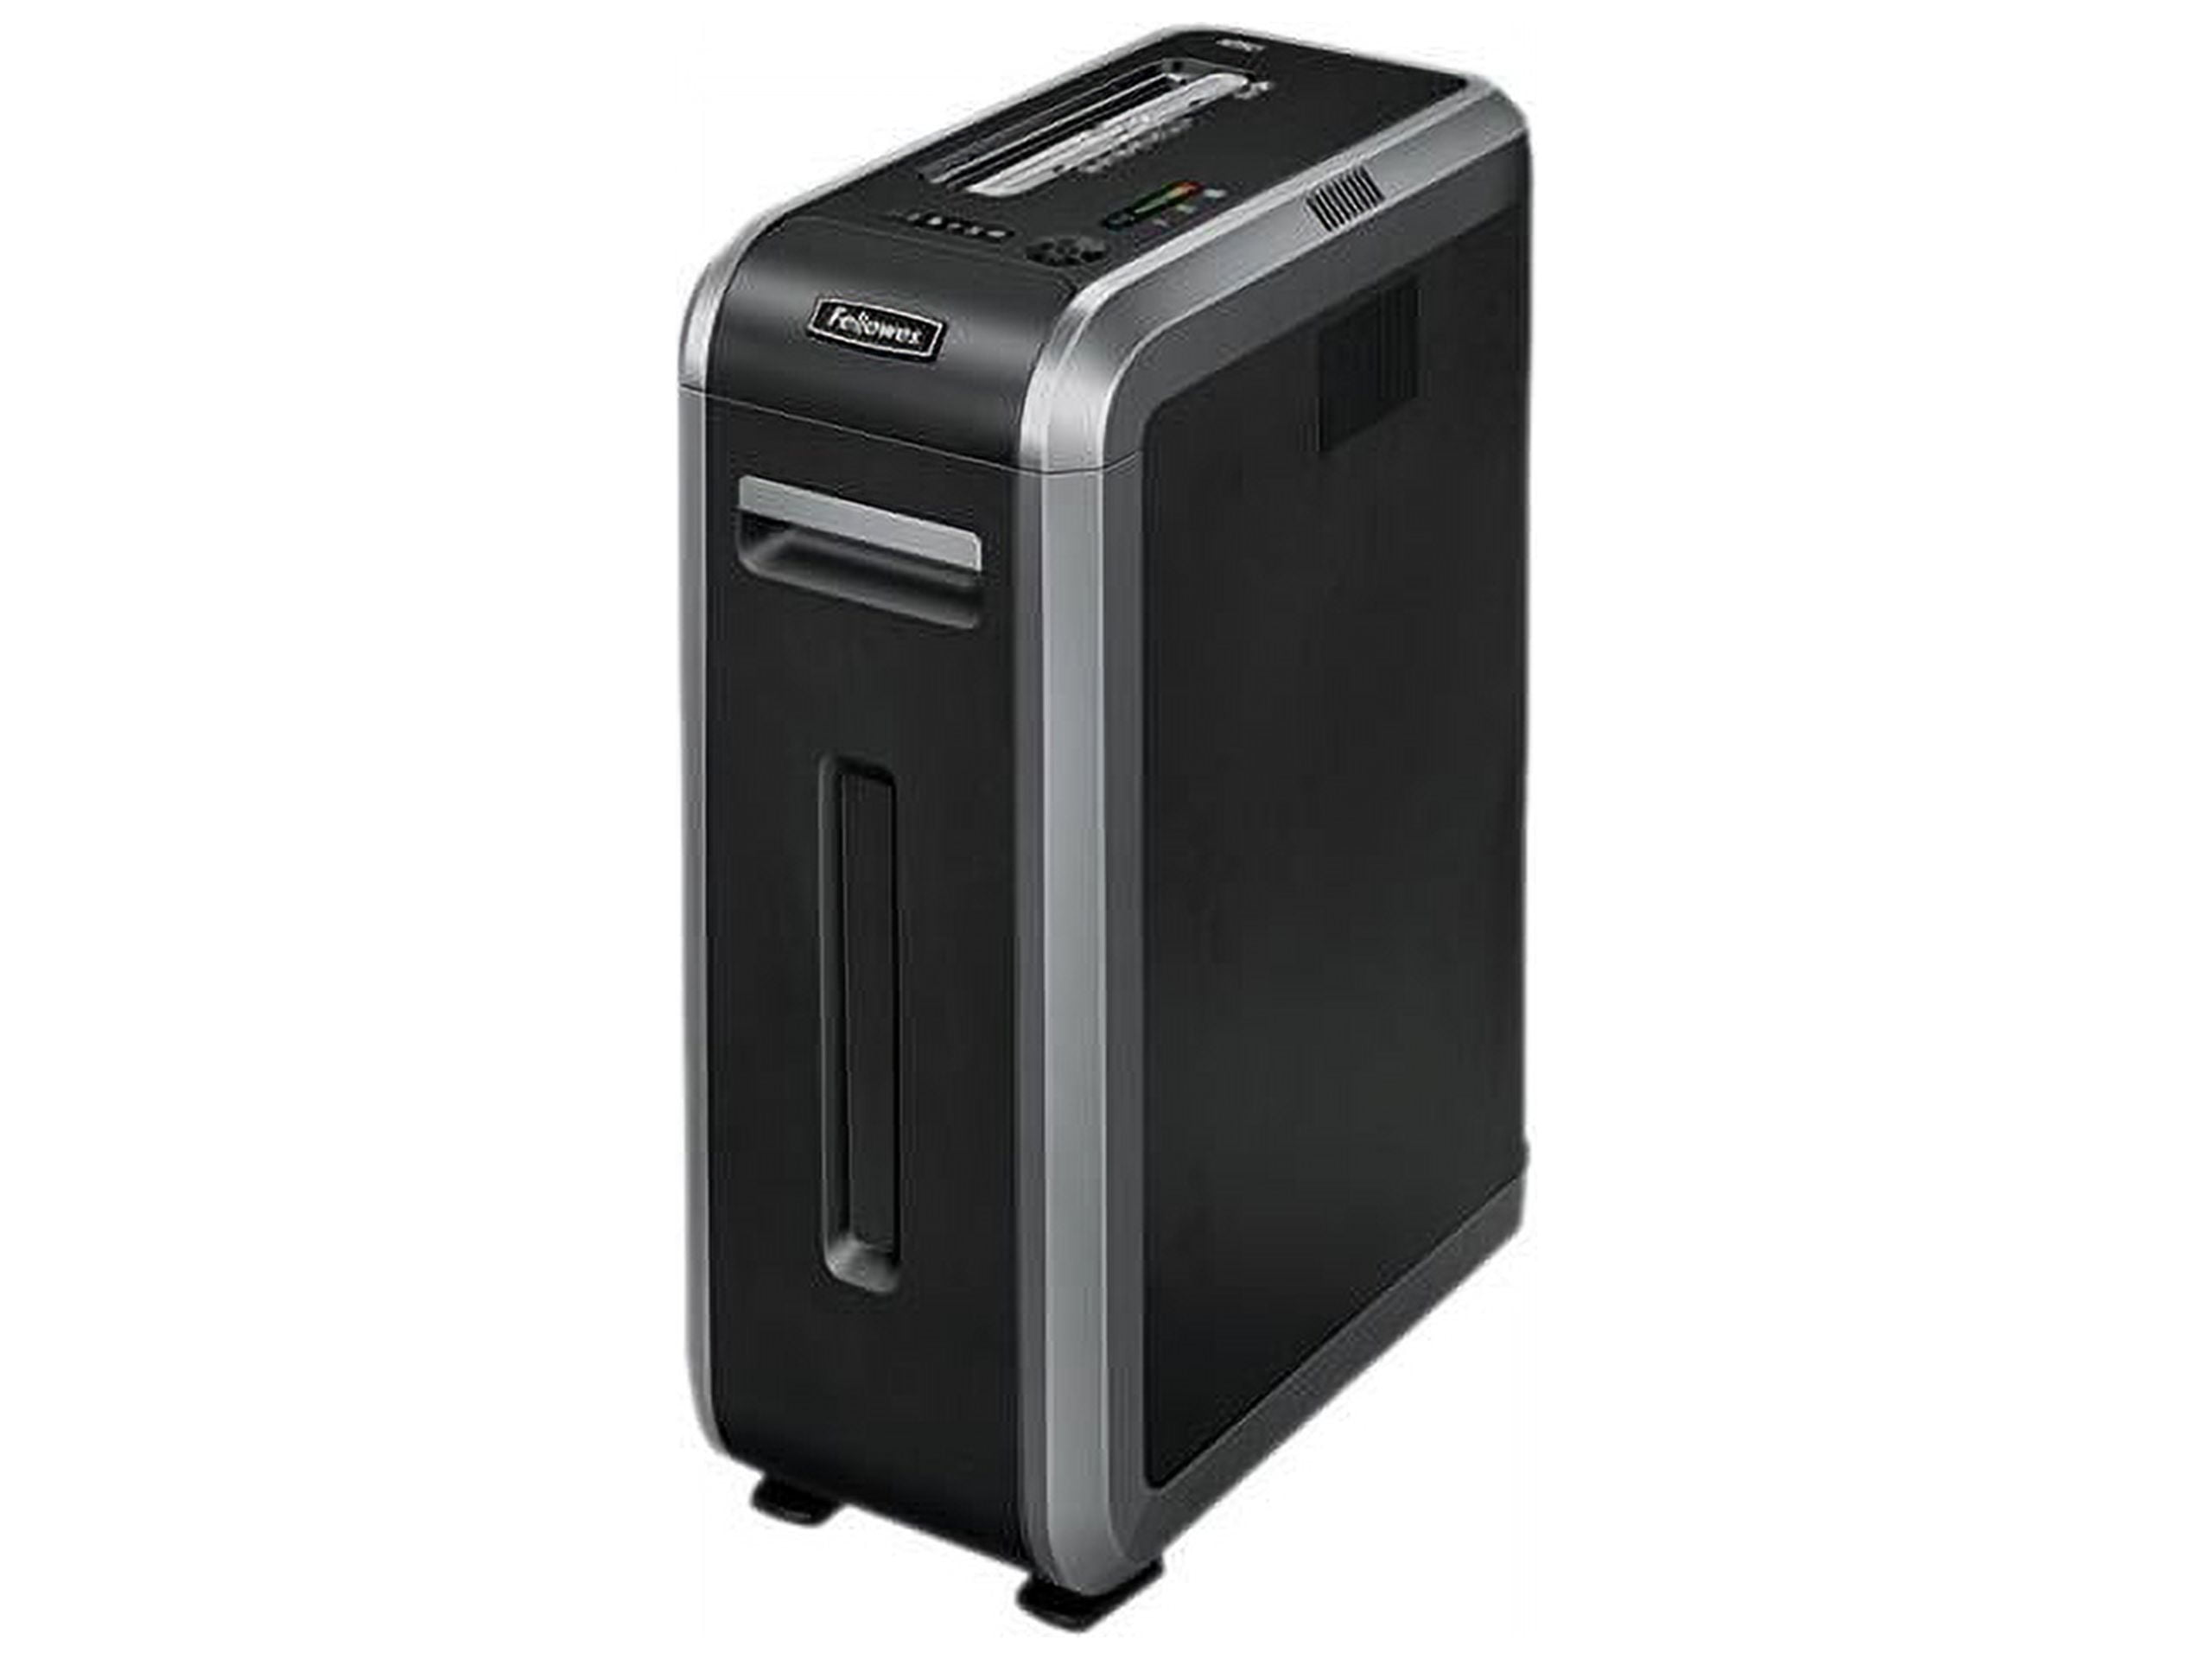 Gaylord Dust Cover for 0300 Series Hard Drive Shredders - SEM Shred